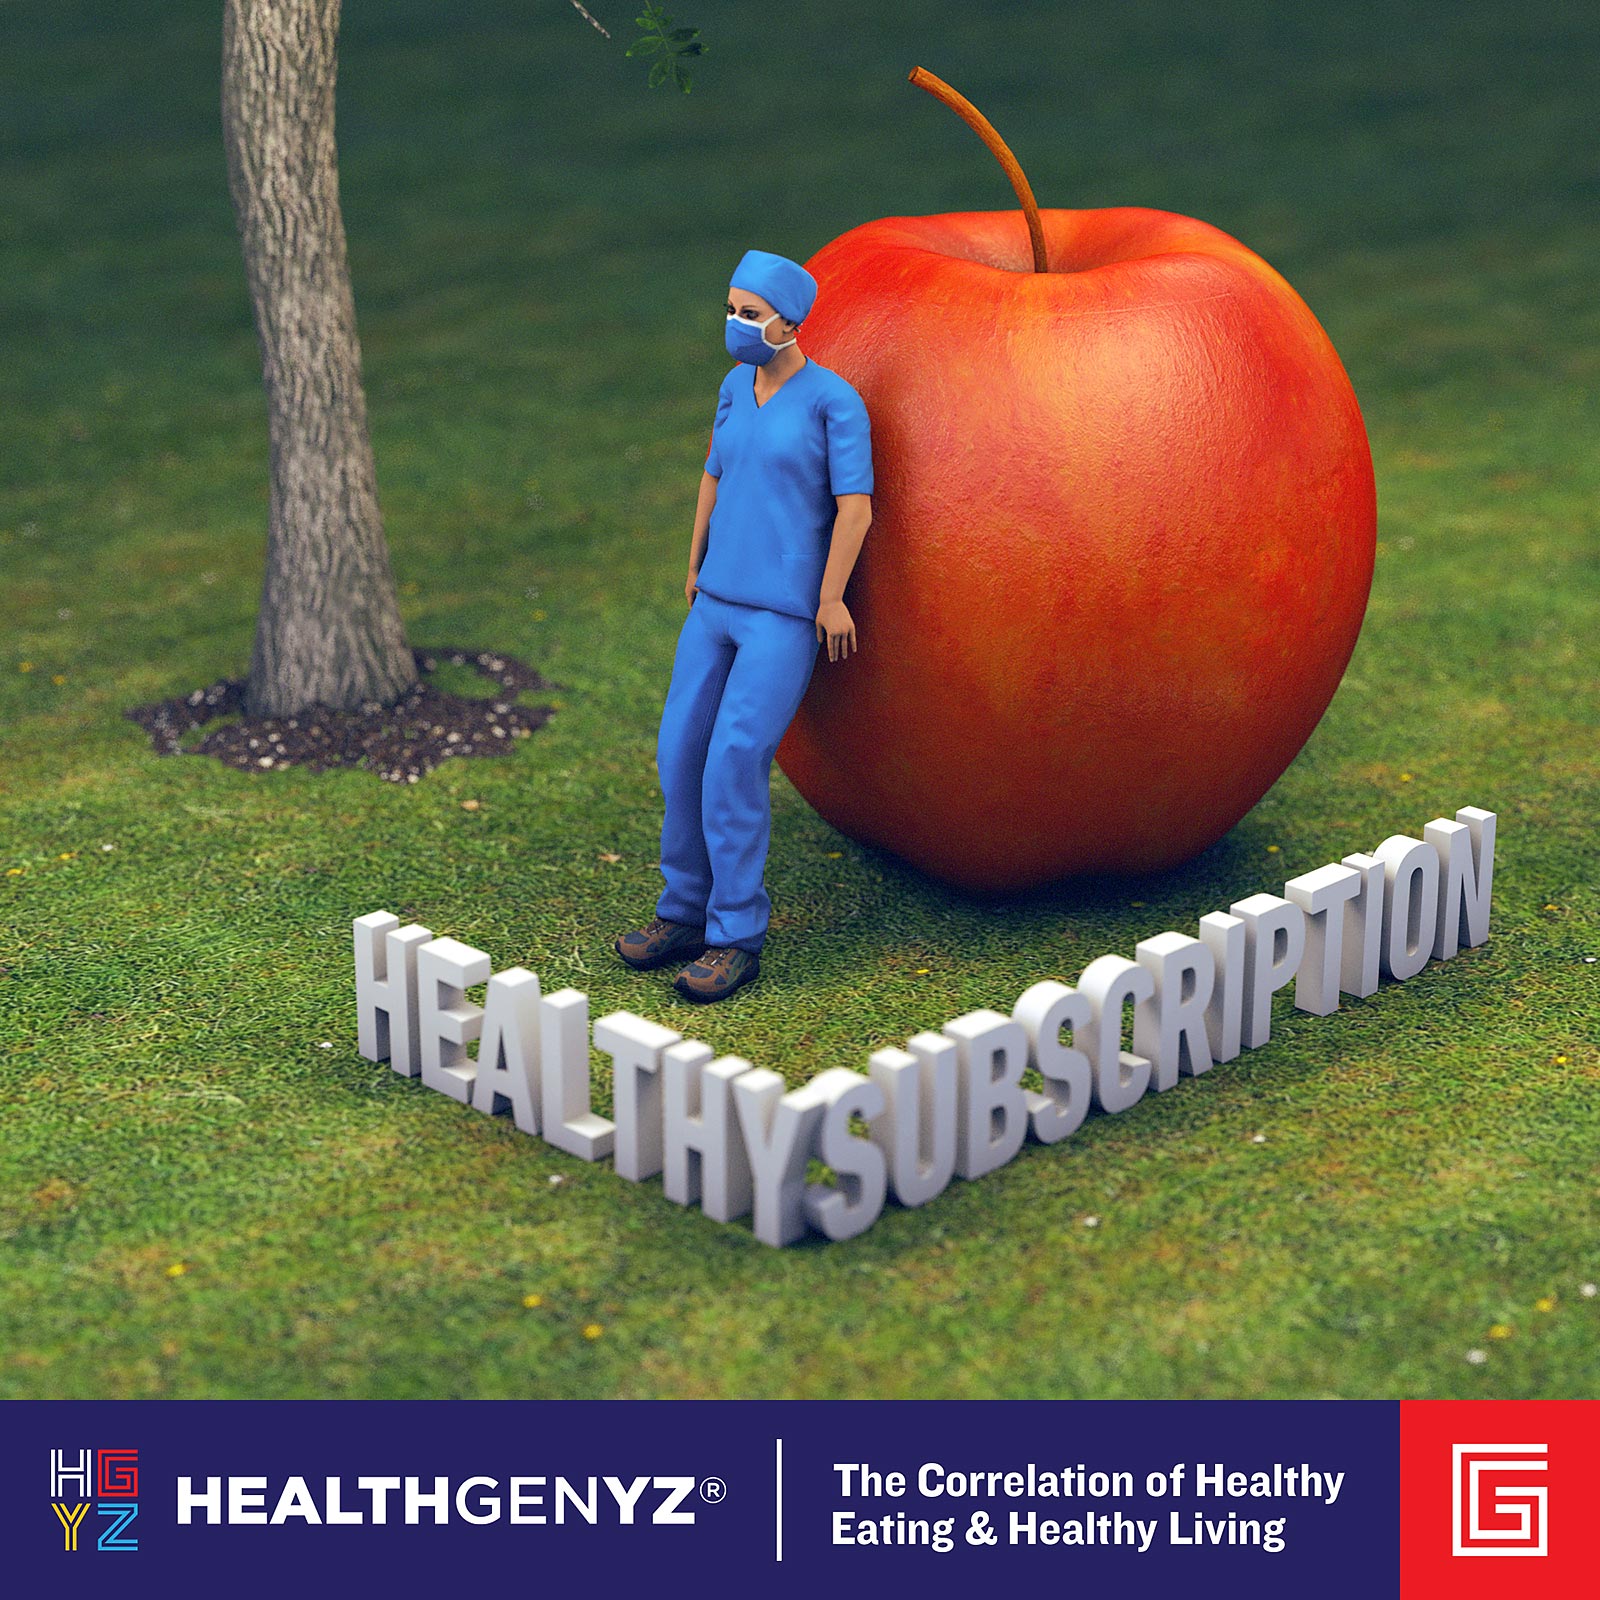 HealthGenYZ category content; a 3D model of a person leaning up against a giant red apple, on a grassy lawn with a tree, with 3D extruded text on the lawn that says, "Healthy Subscription".